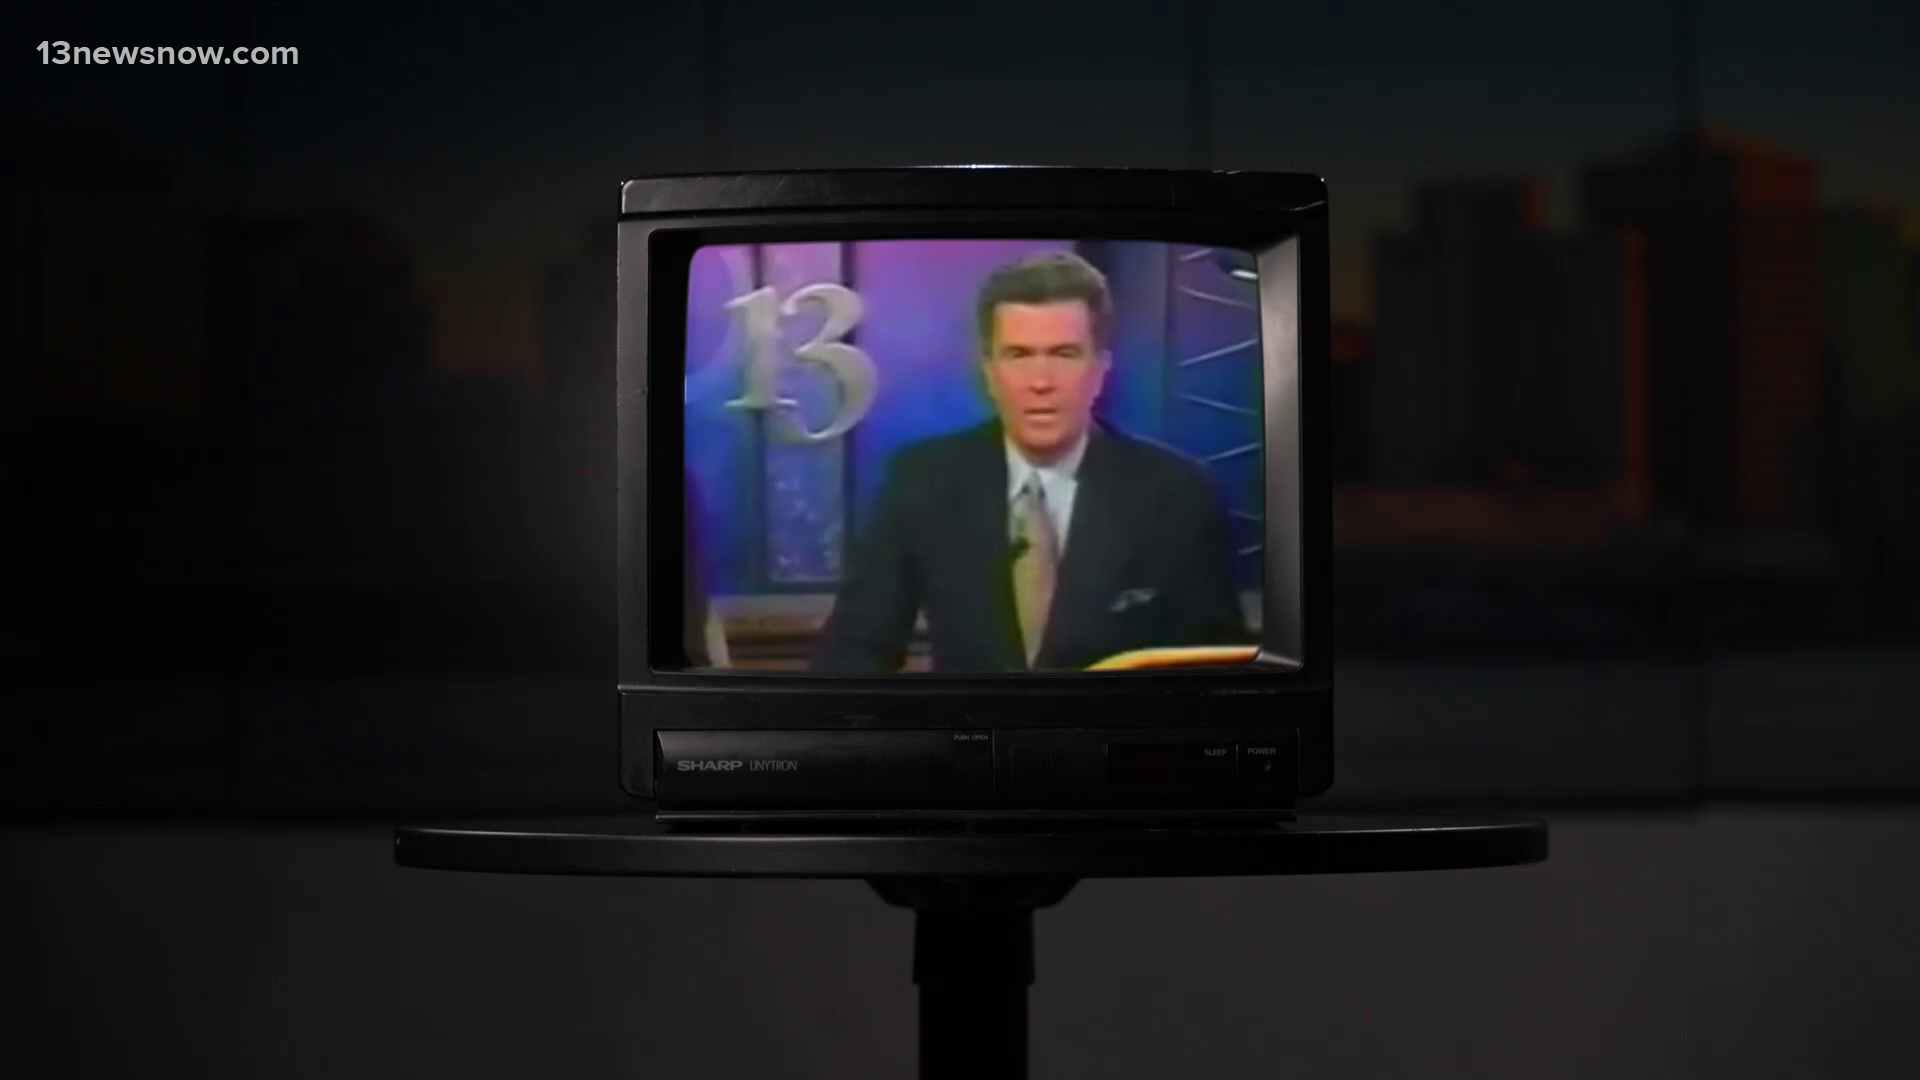 Alan joined the WVEC newsroom in 2000, replacing anchor Terry Zahn, who had passed away after a public battle with cancer.